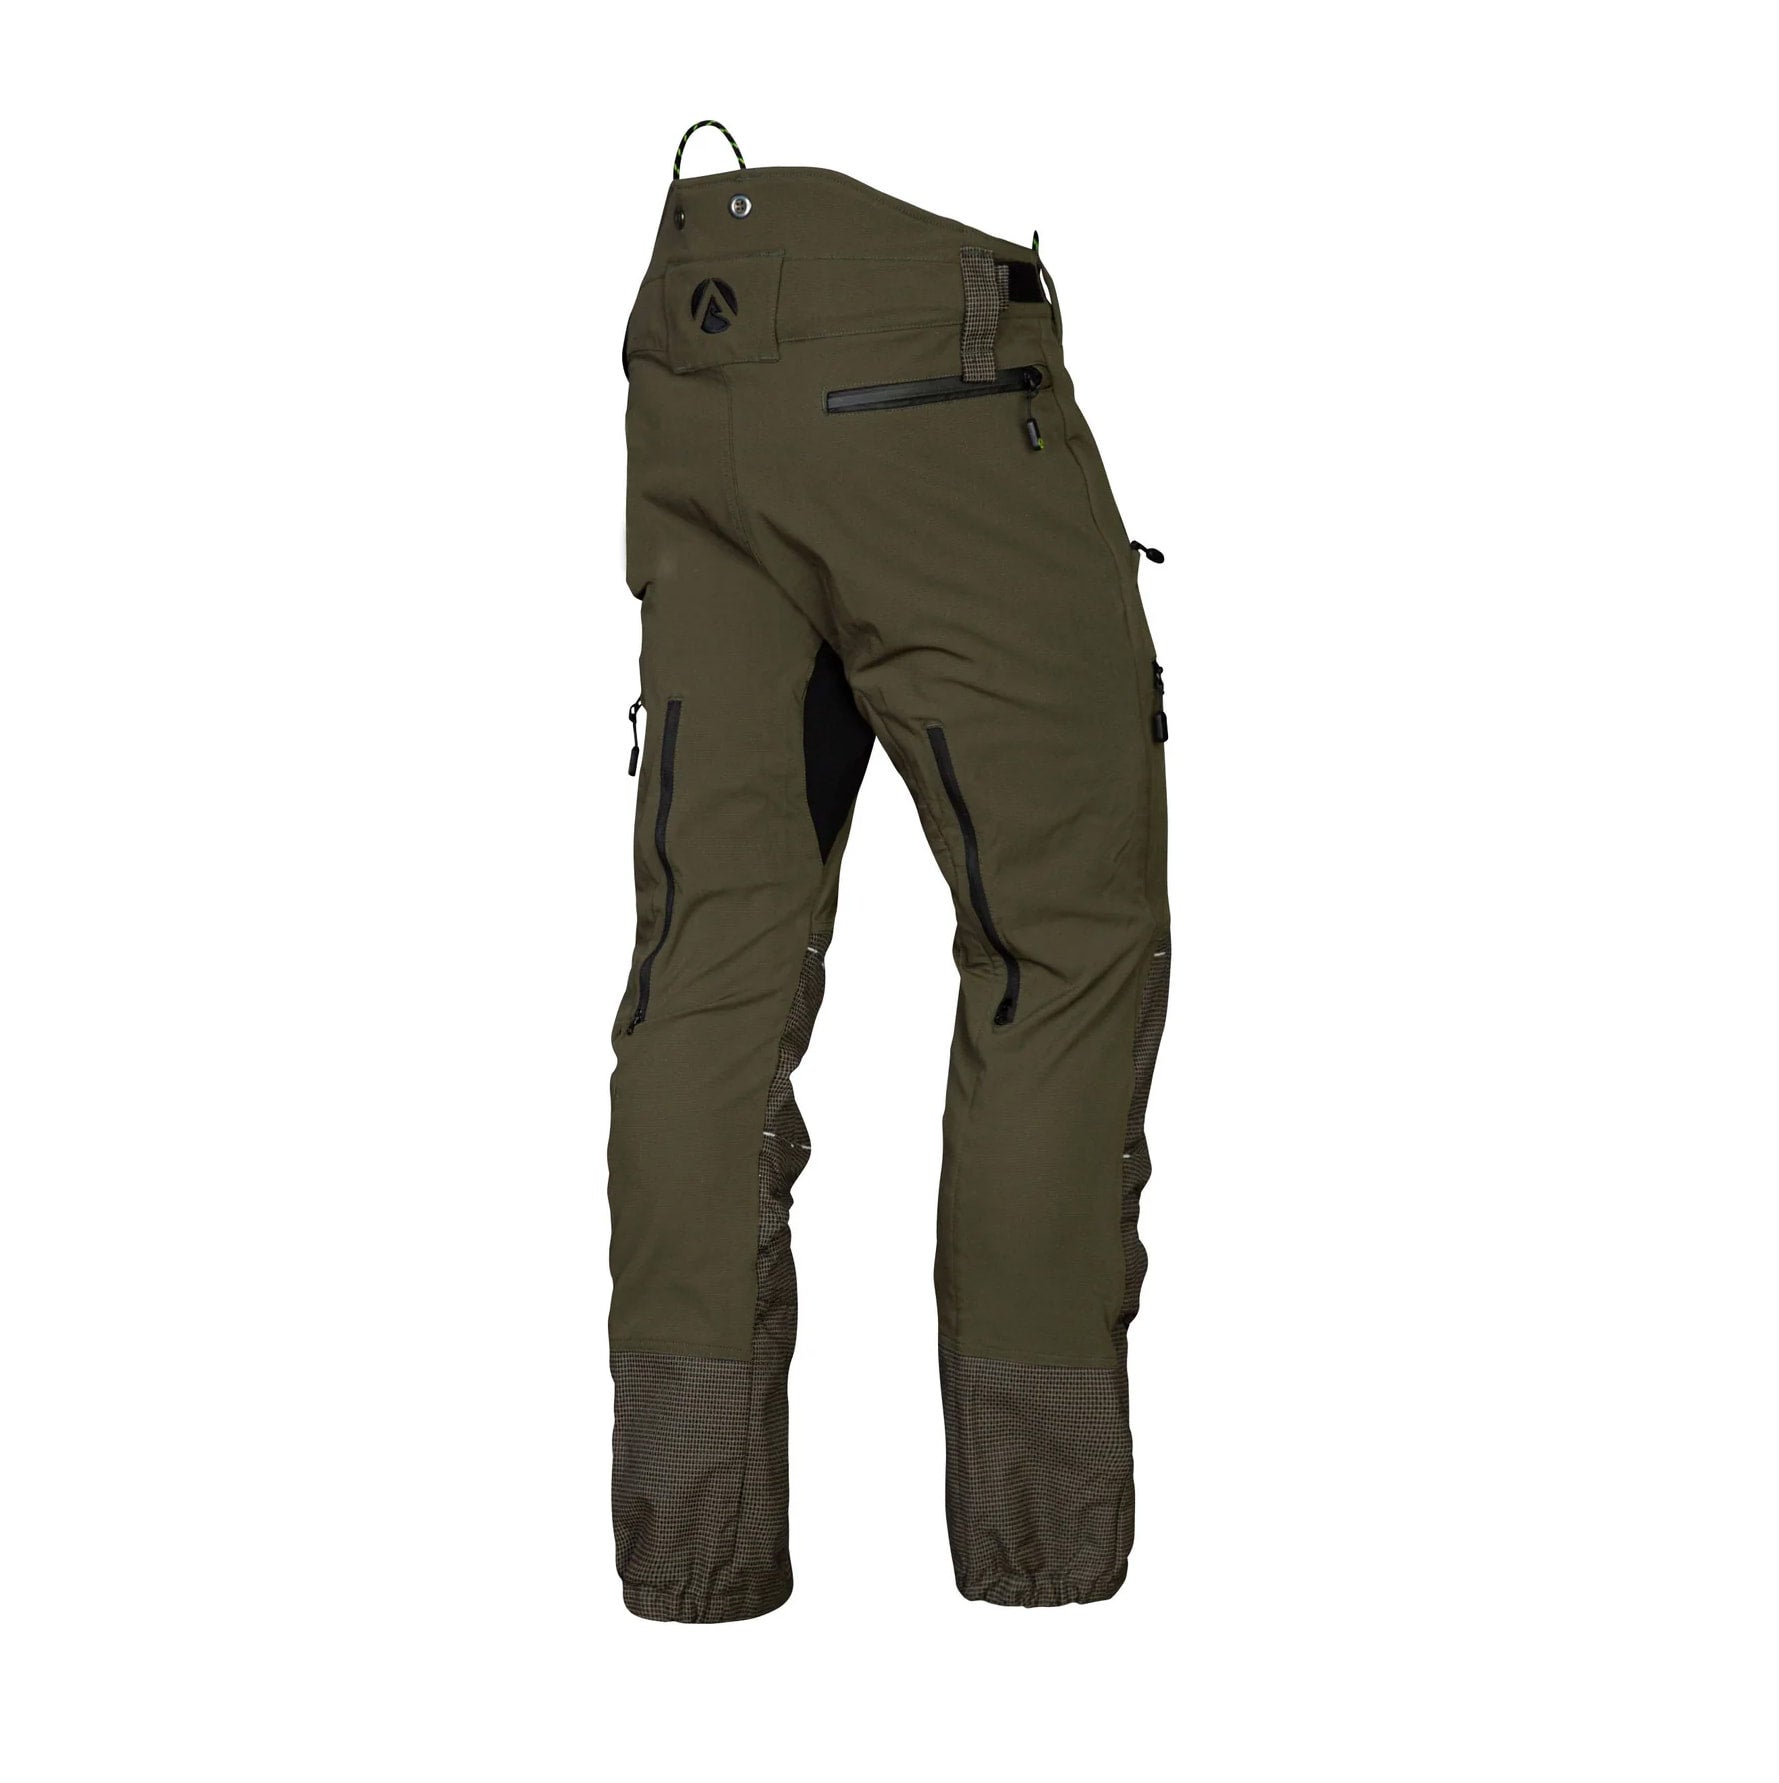 Zero' Saw Trousers - 'Elevated' || WesSpur Tree Equipment